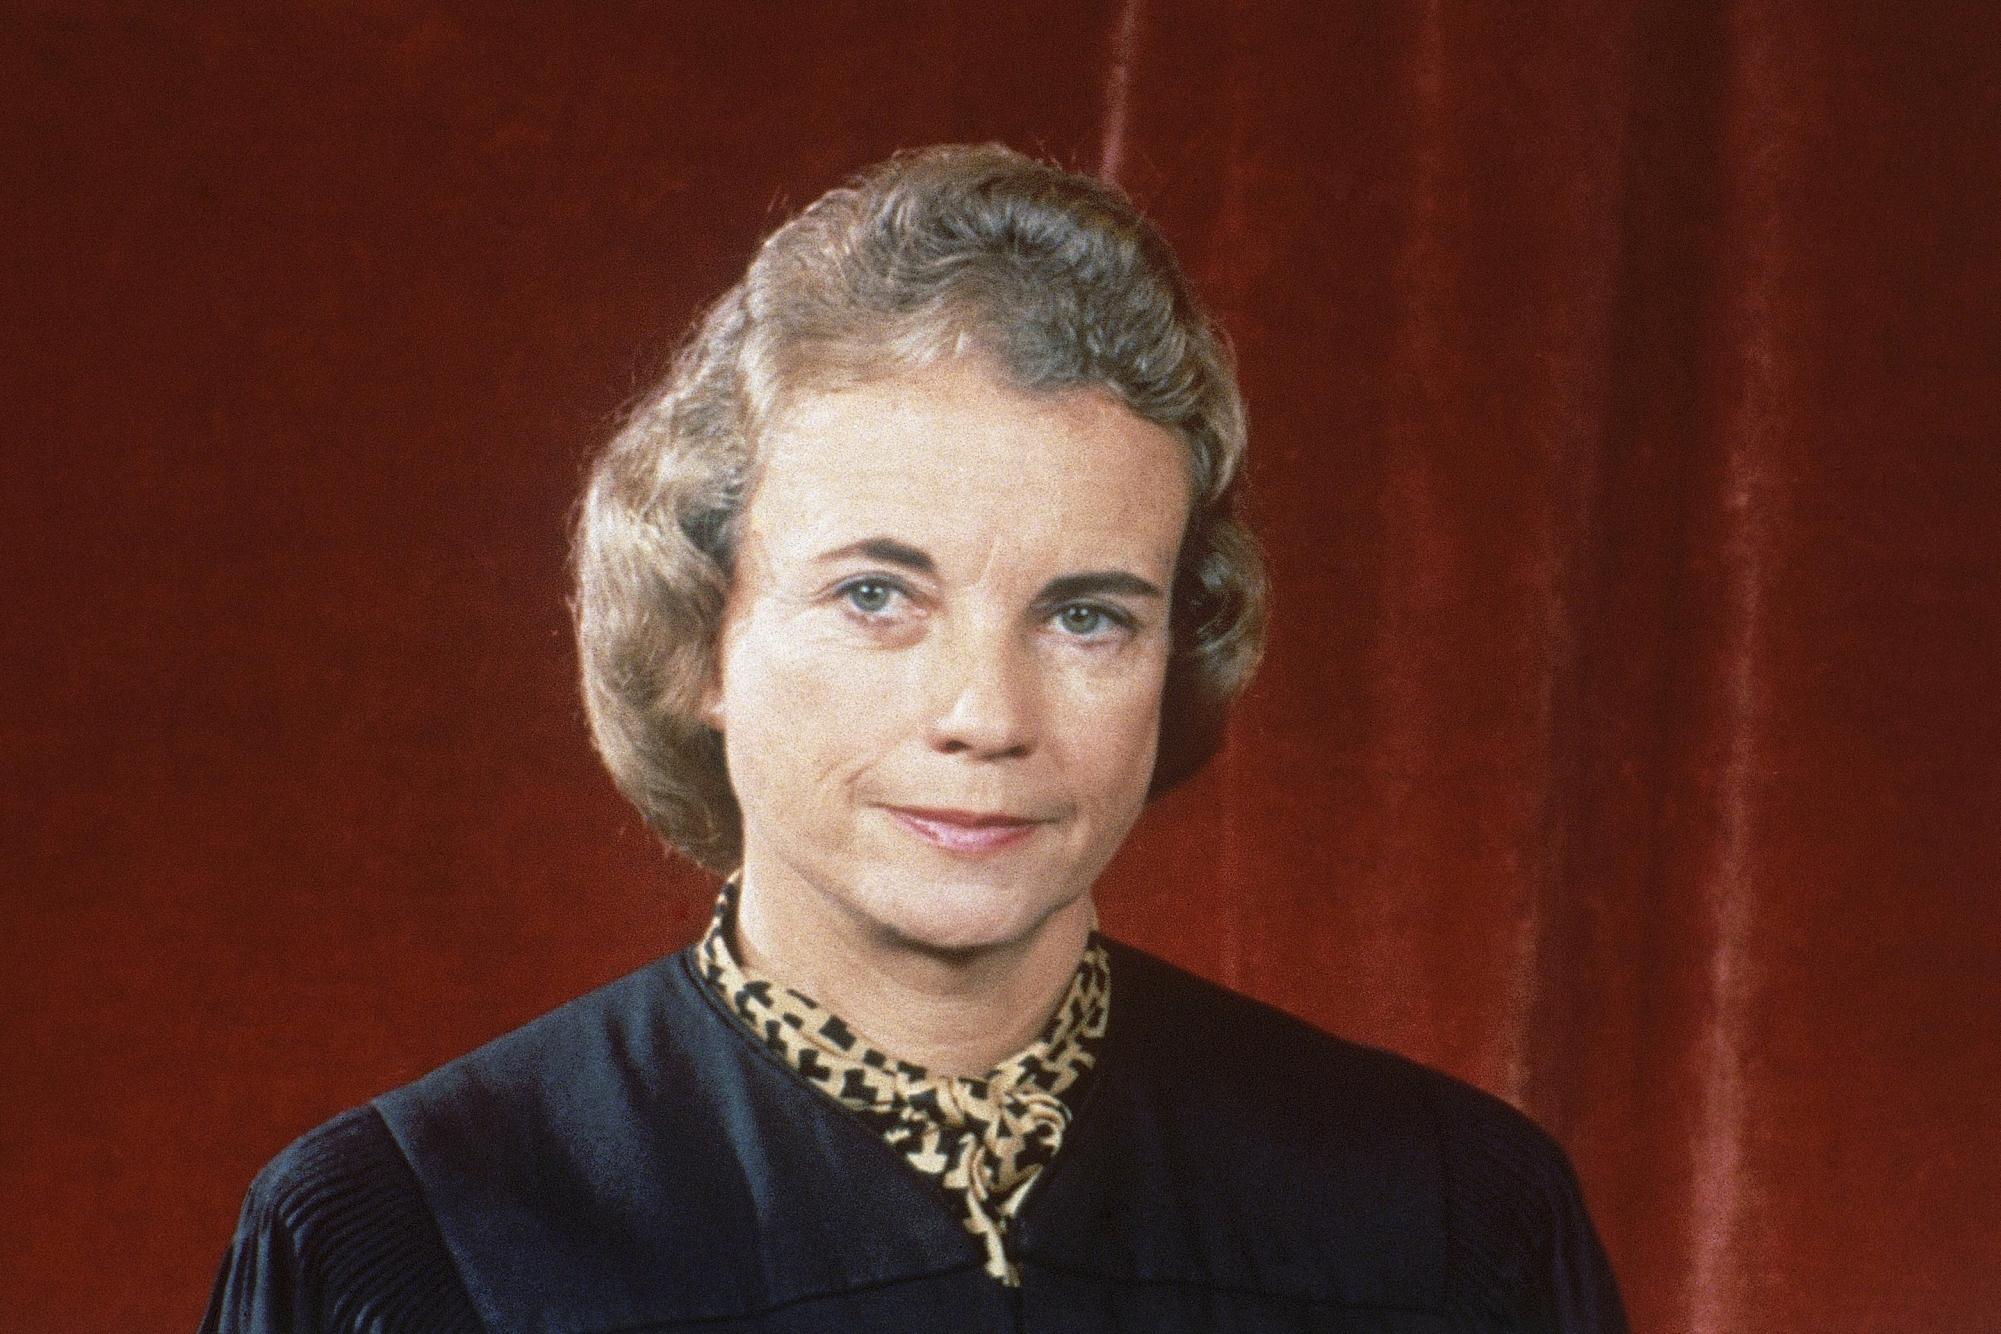 Supreme Court Associate Justice Sandra Day OConnor poses for a photo in 1982. OConnor joined the Supreme Court in 1981 as the nations first female justice, has died at age 93. (AP Photo, File)